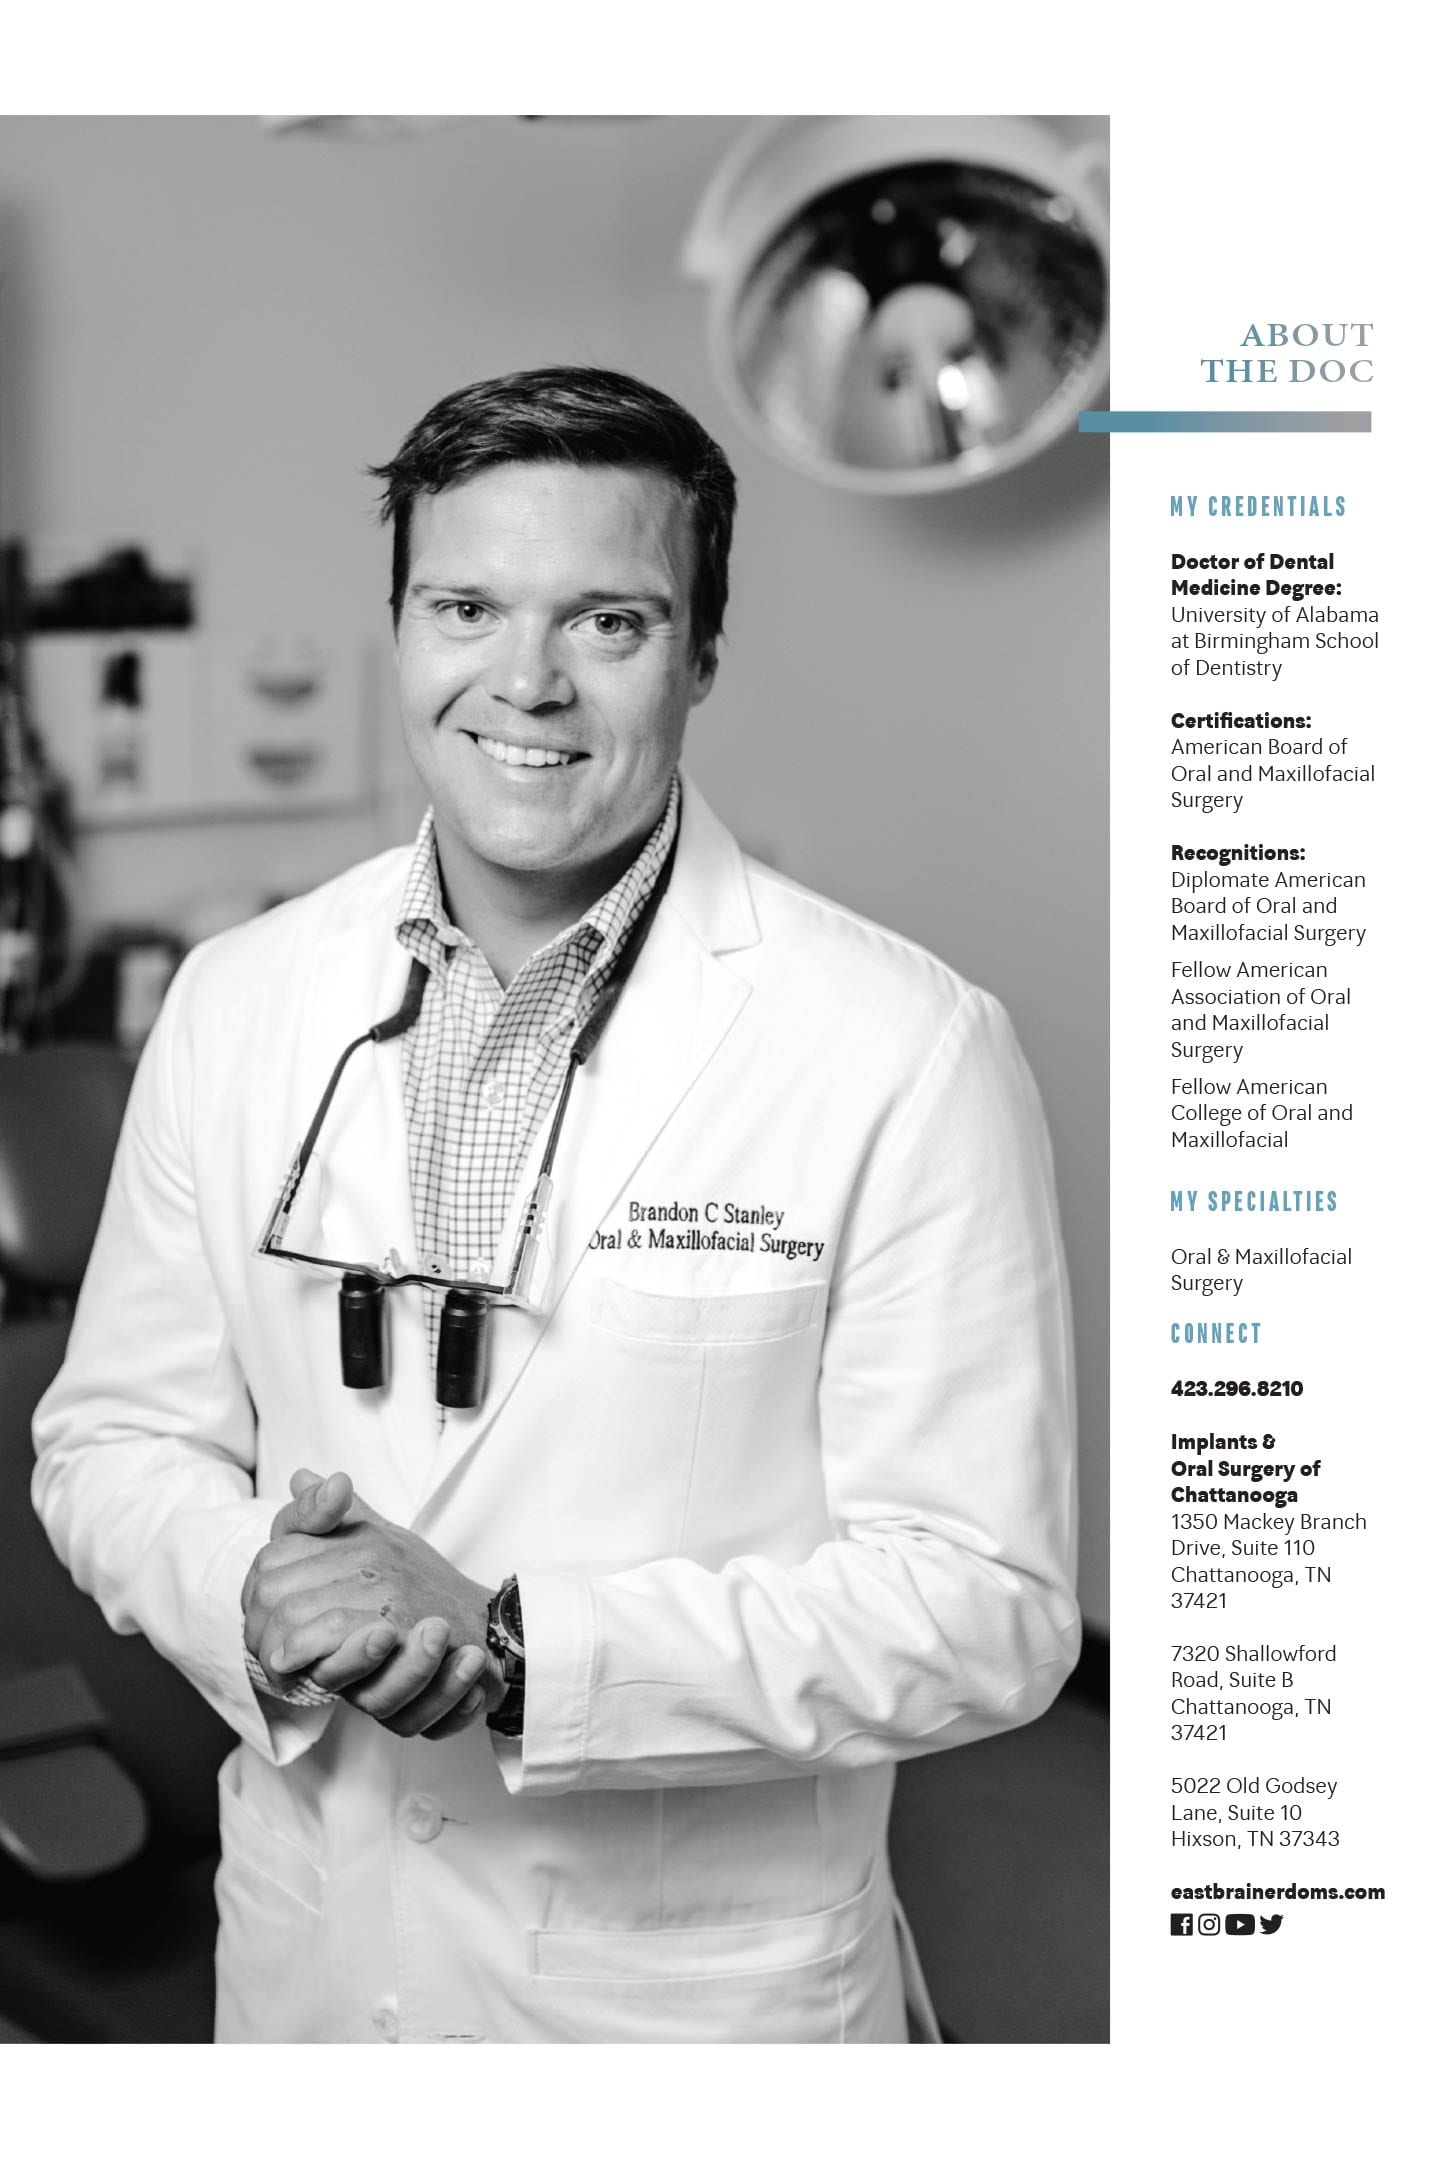 Dr. Brandon Stanley's Credentials, Specialties, and Contact Info